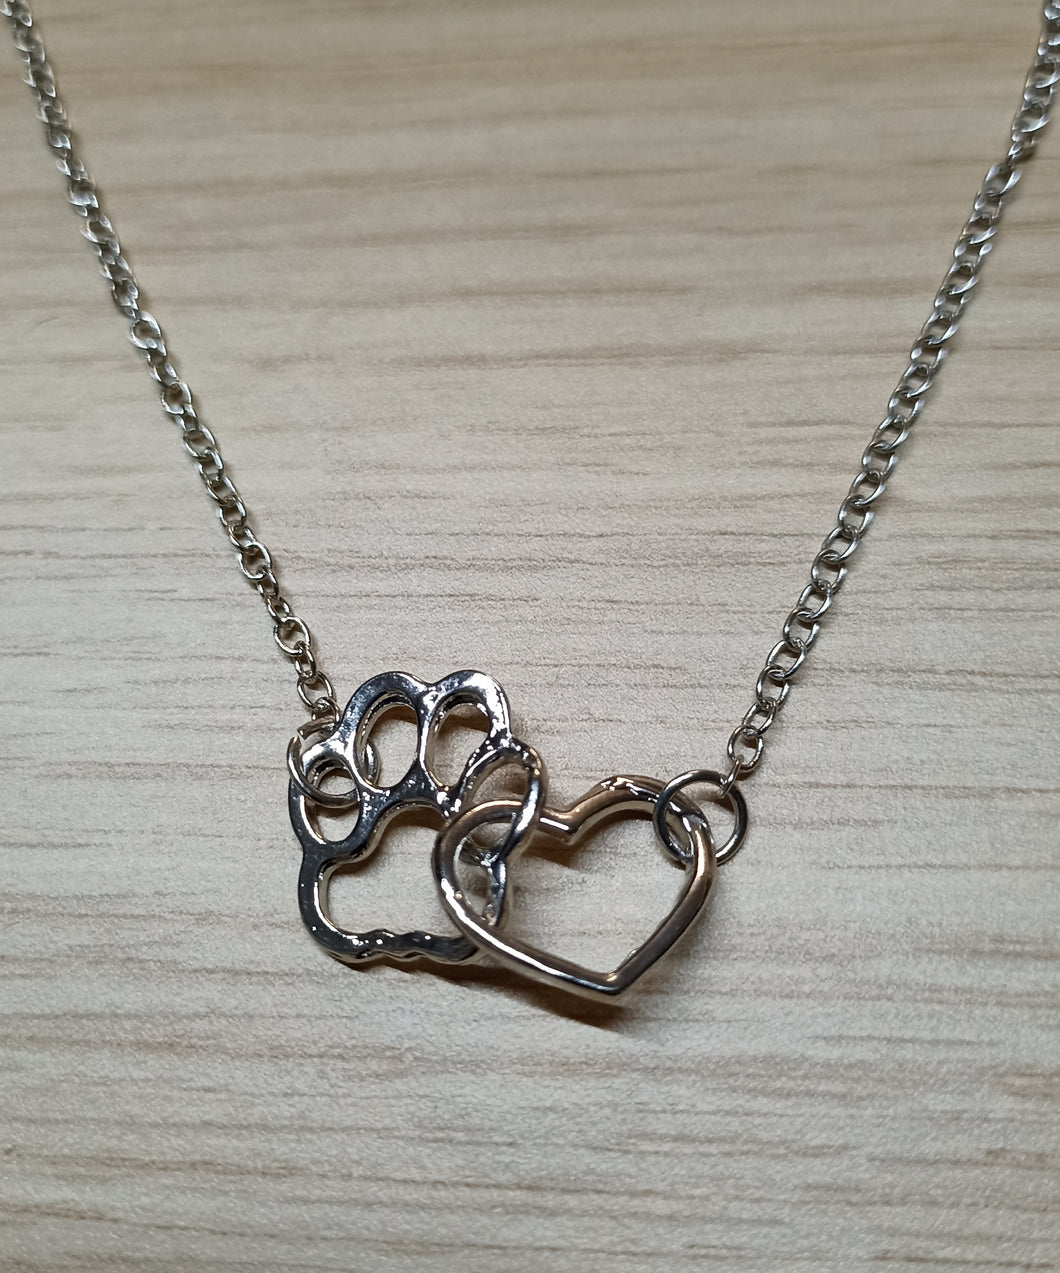 Paw & Heart Necklace